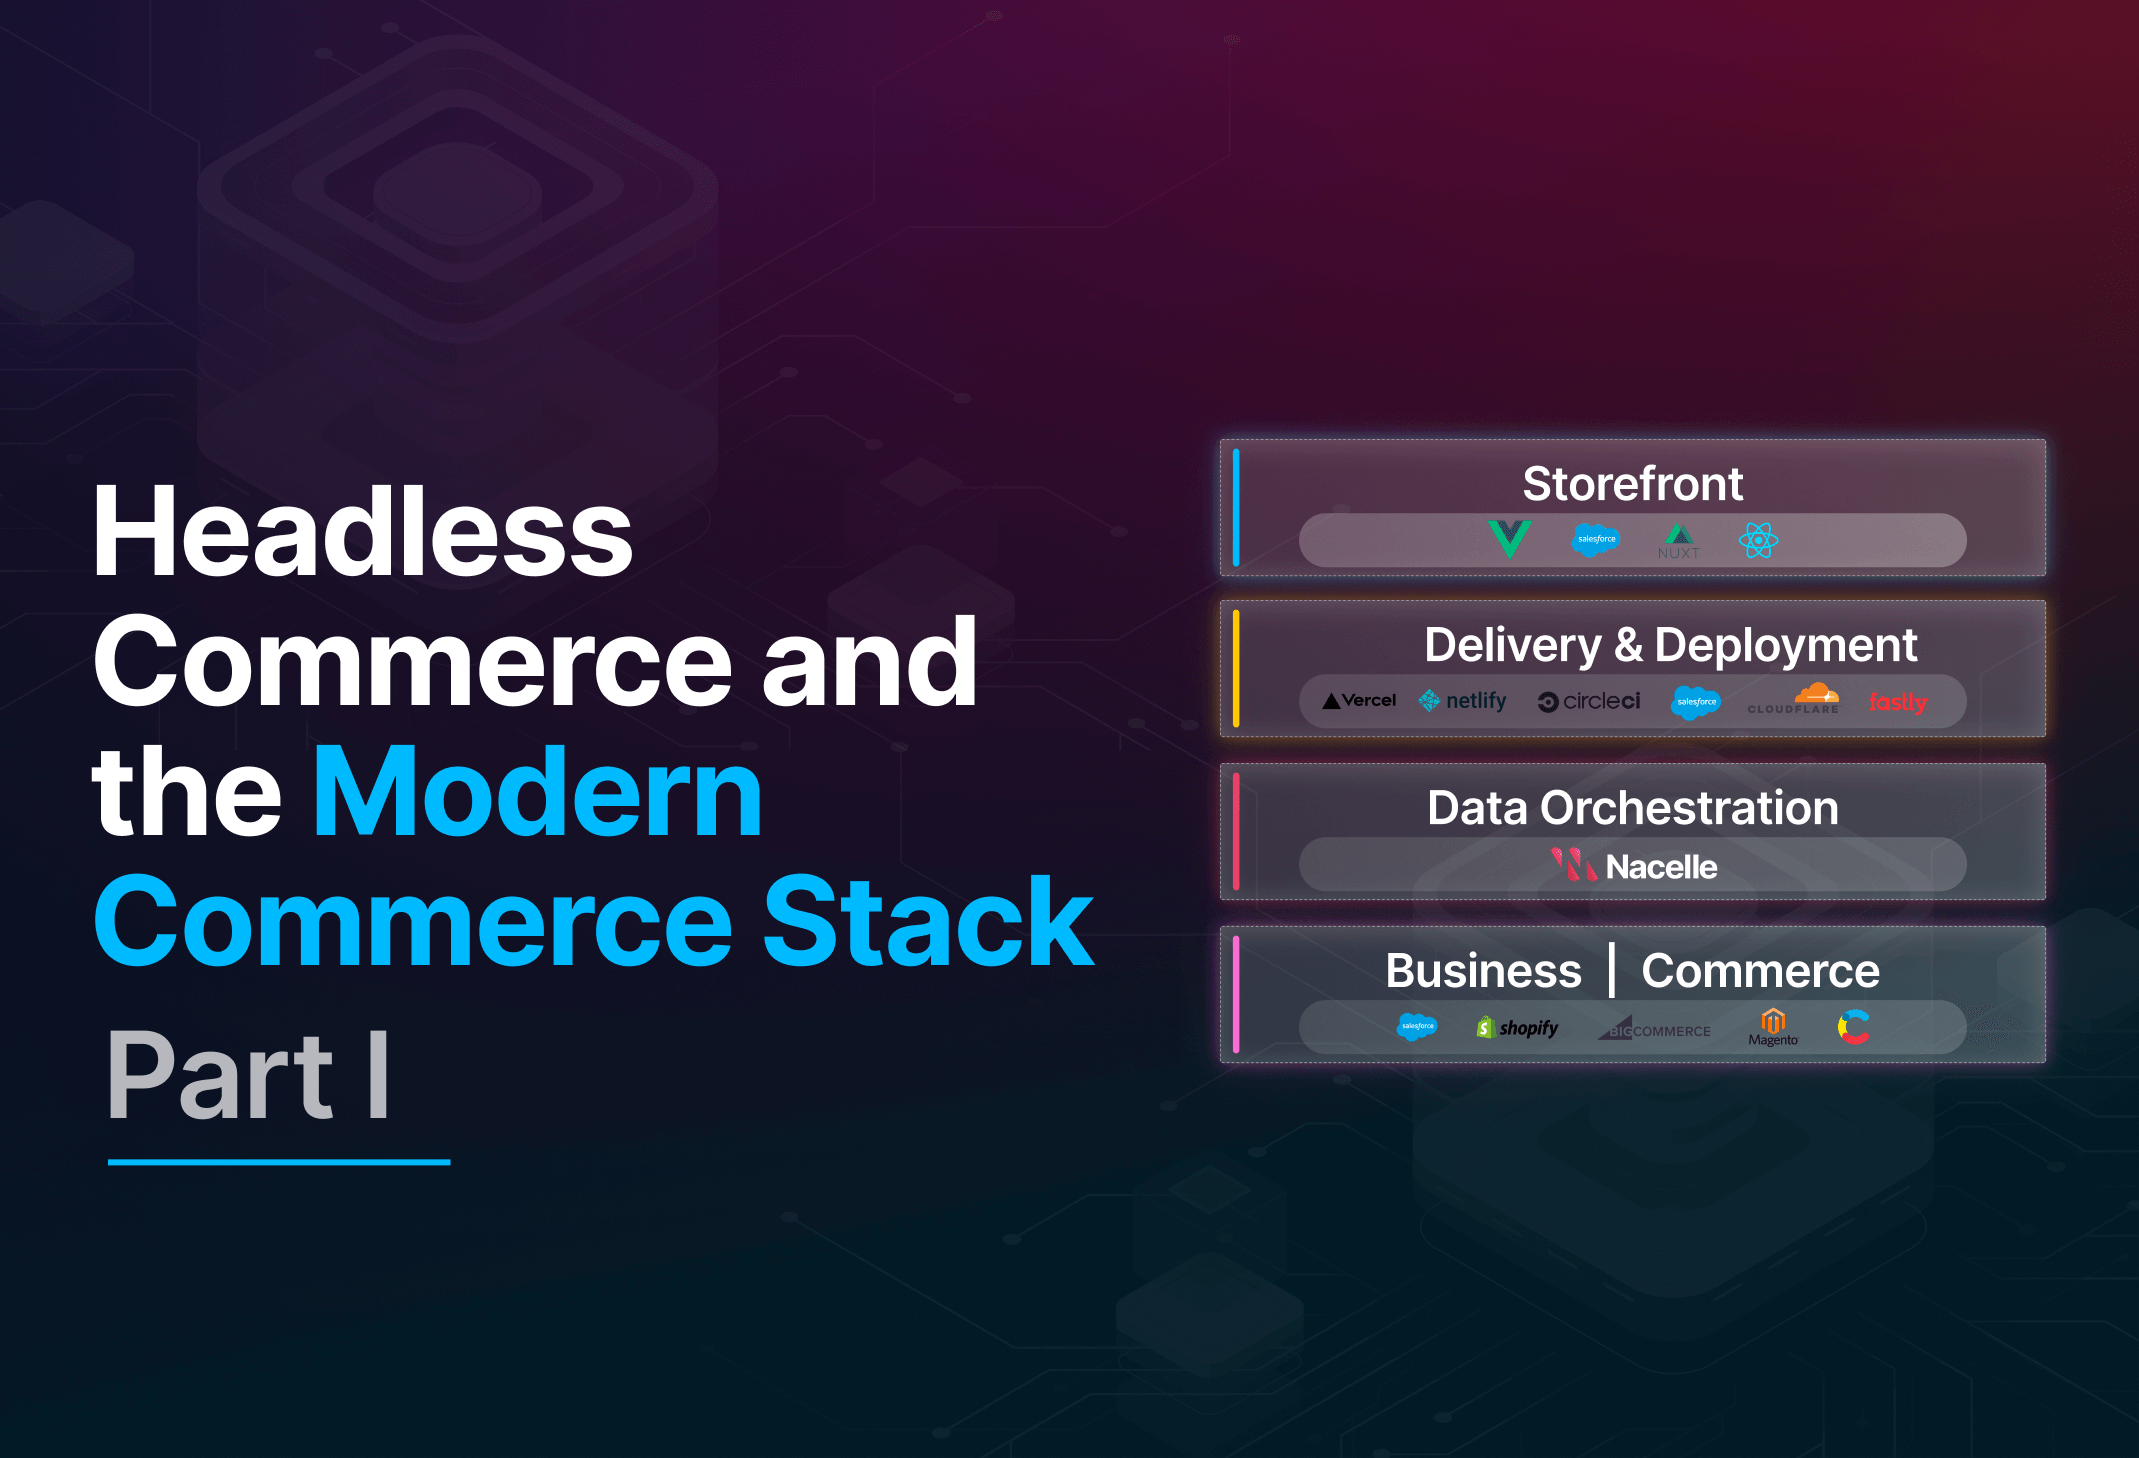  Headless commerce and the modern commerce stack (part I of III) 